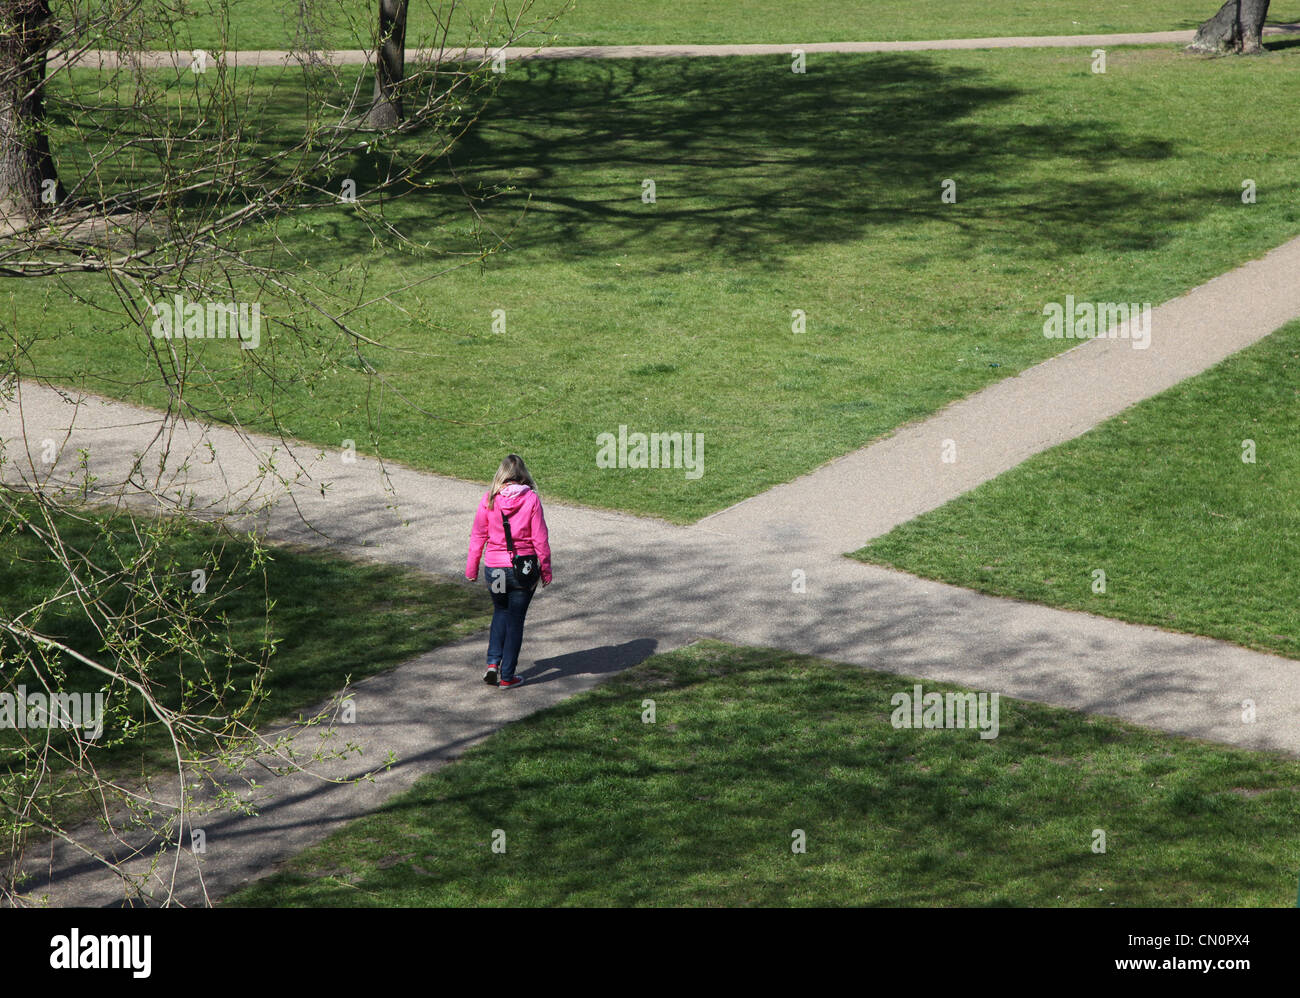 A woman at a crossroads path, making a choice about which way to go. Stock Photo